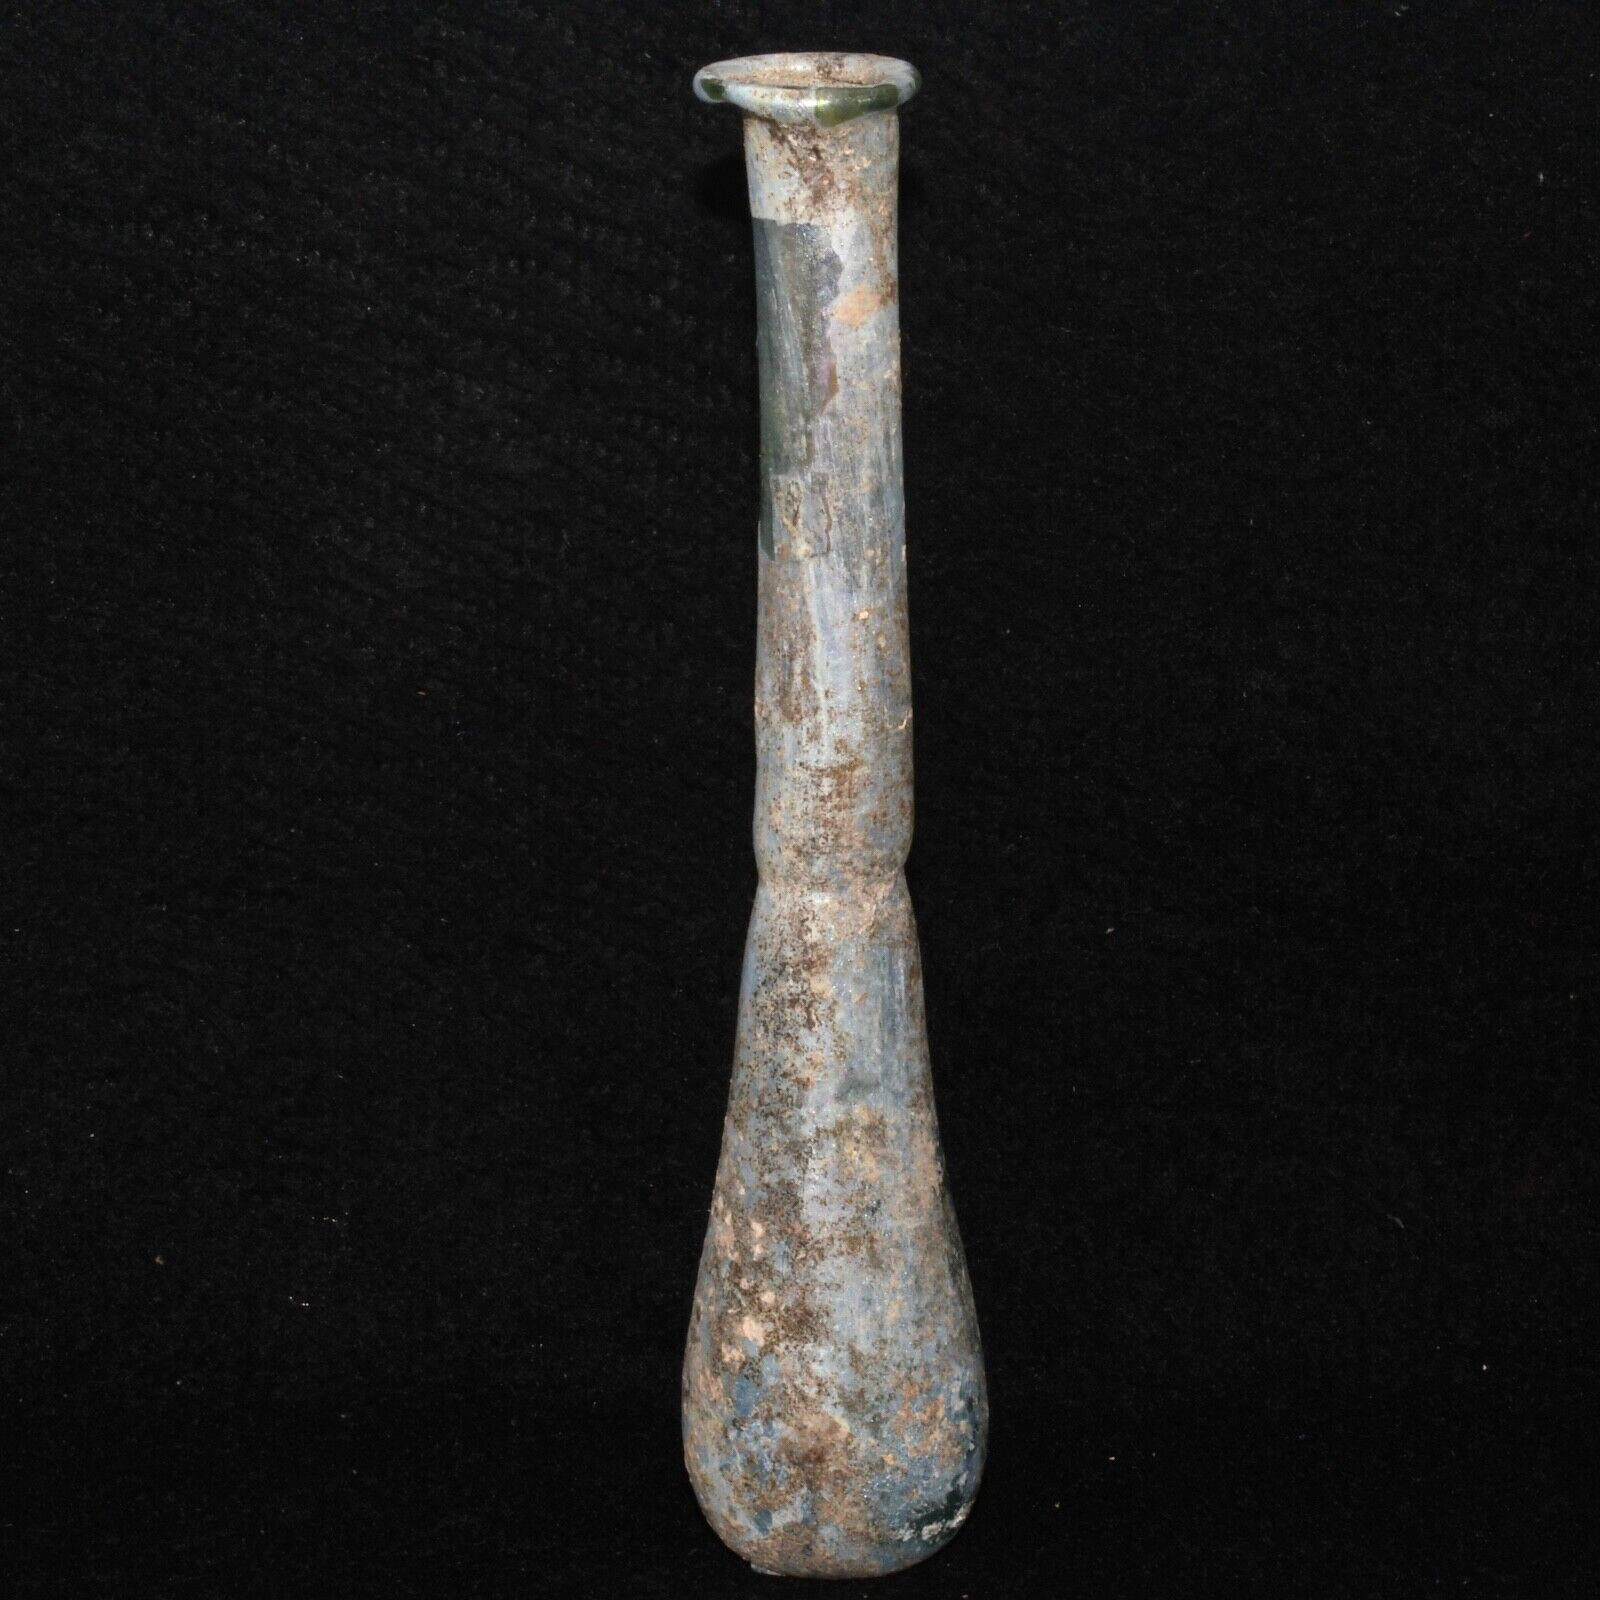 Ancient Roman Glass Vessel Bottle in Perfect Condition with Long Neck